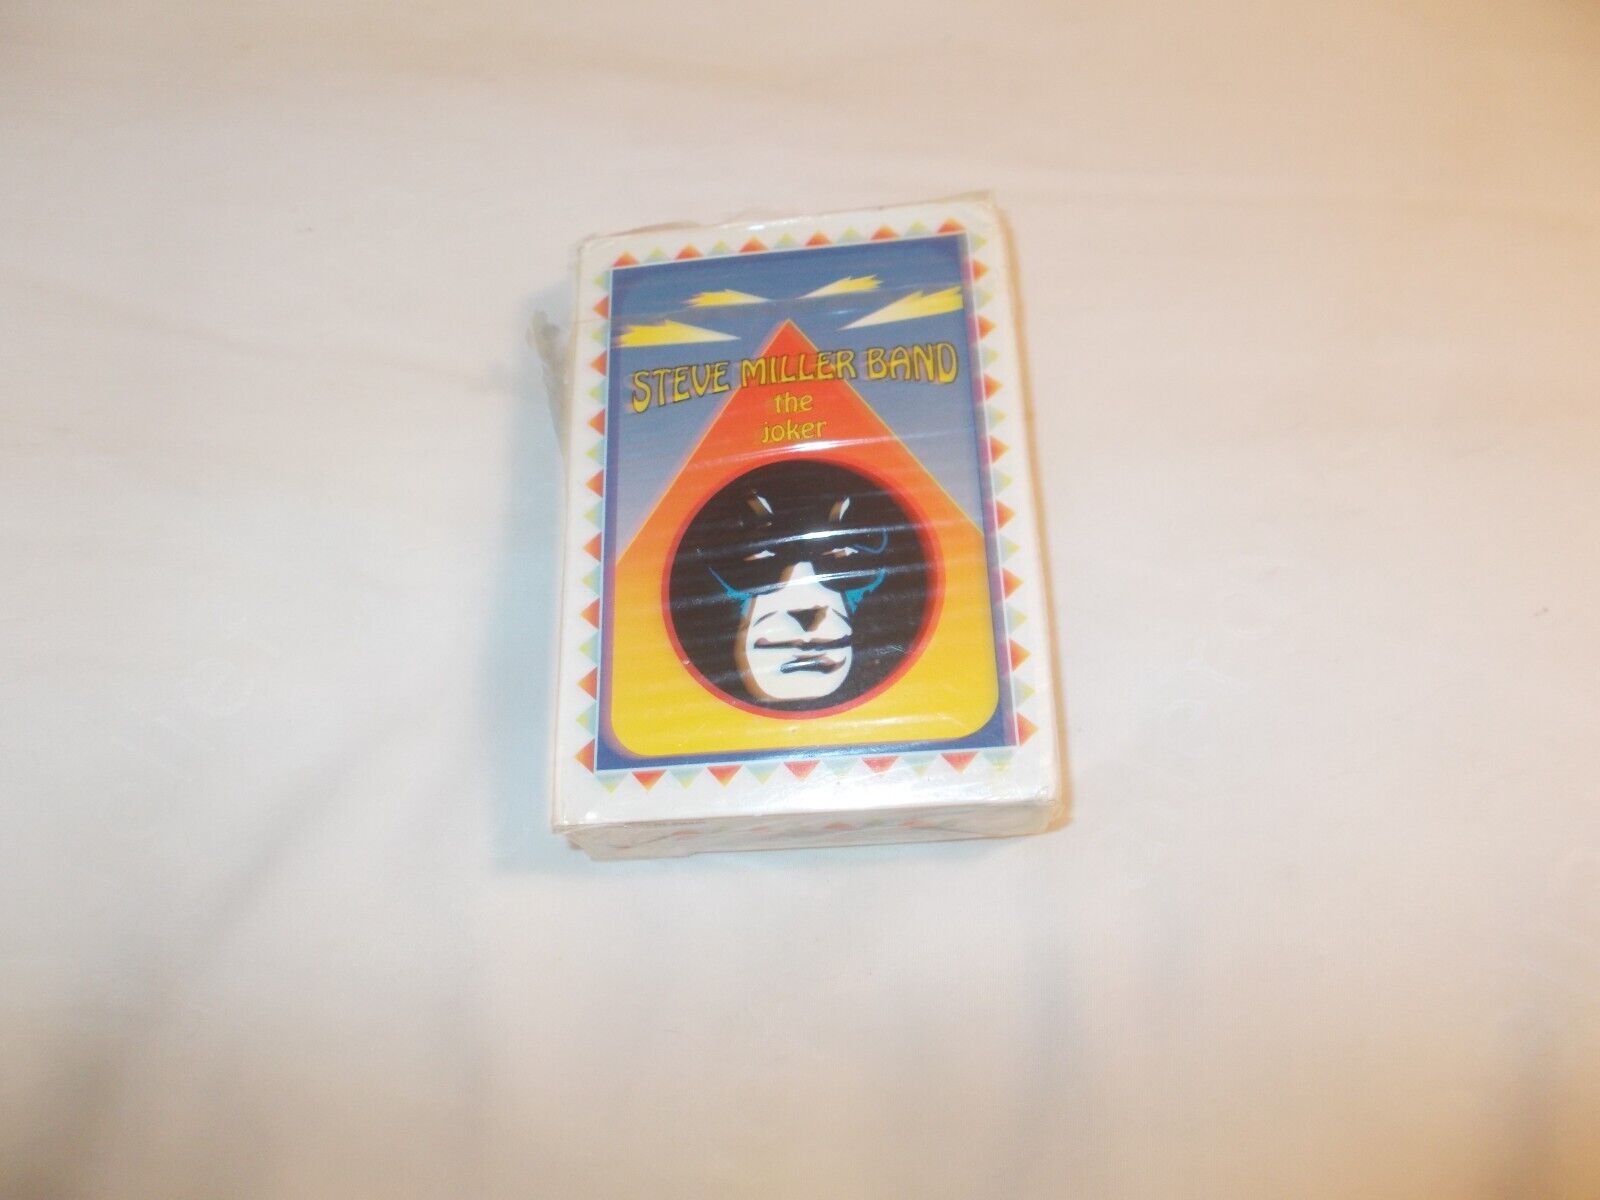 THE   STEVE   MILLER   BAND   THE  JOKER   SEALED   DECK  PLAYING   CARDS  PROMO